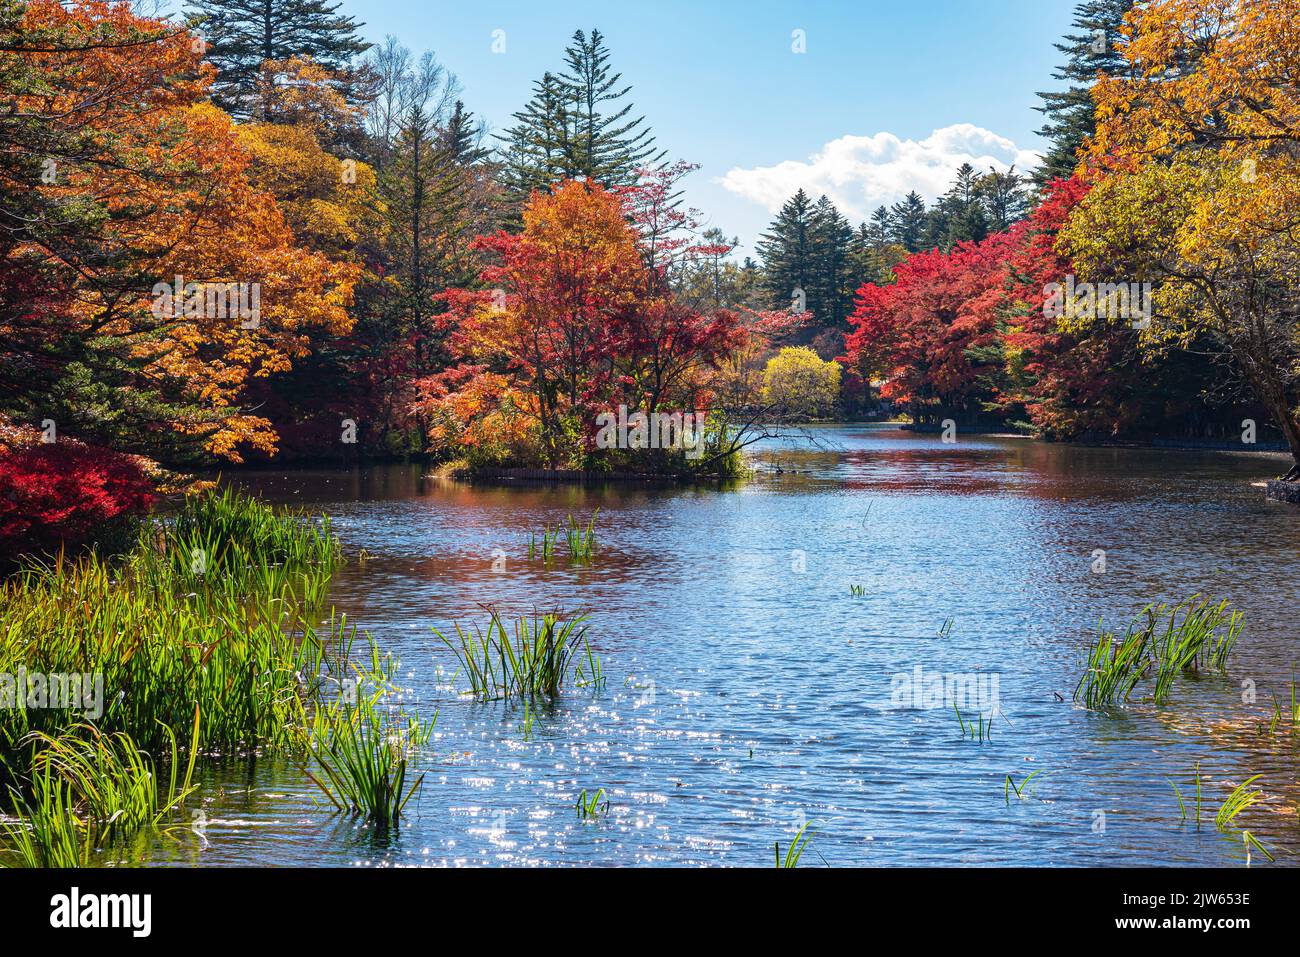 Kumobaike Pond autumn foliage scenery view, multicolor reflecting on surface in sunny day. Nagano Prefecture, Japan Stock Photo